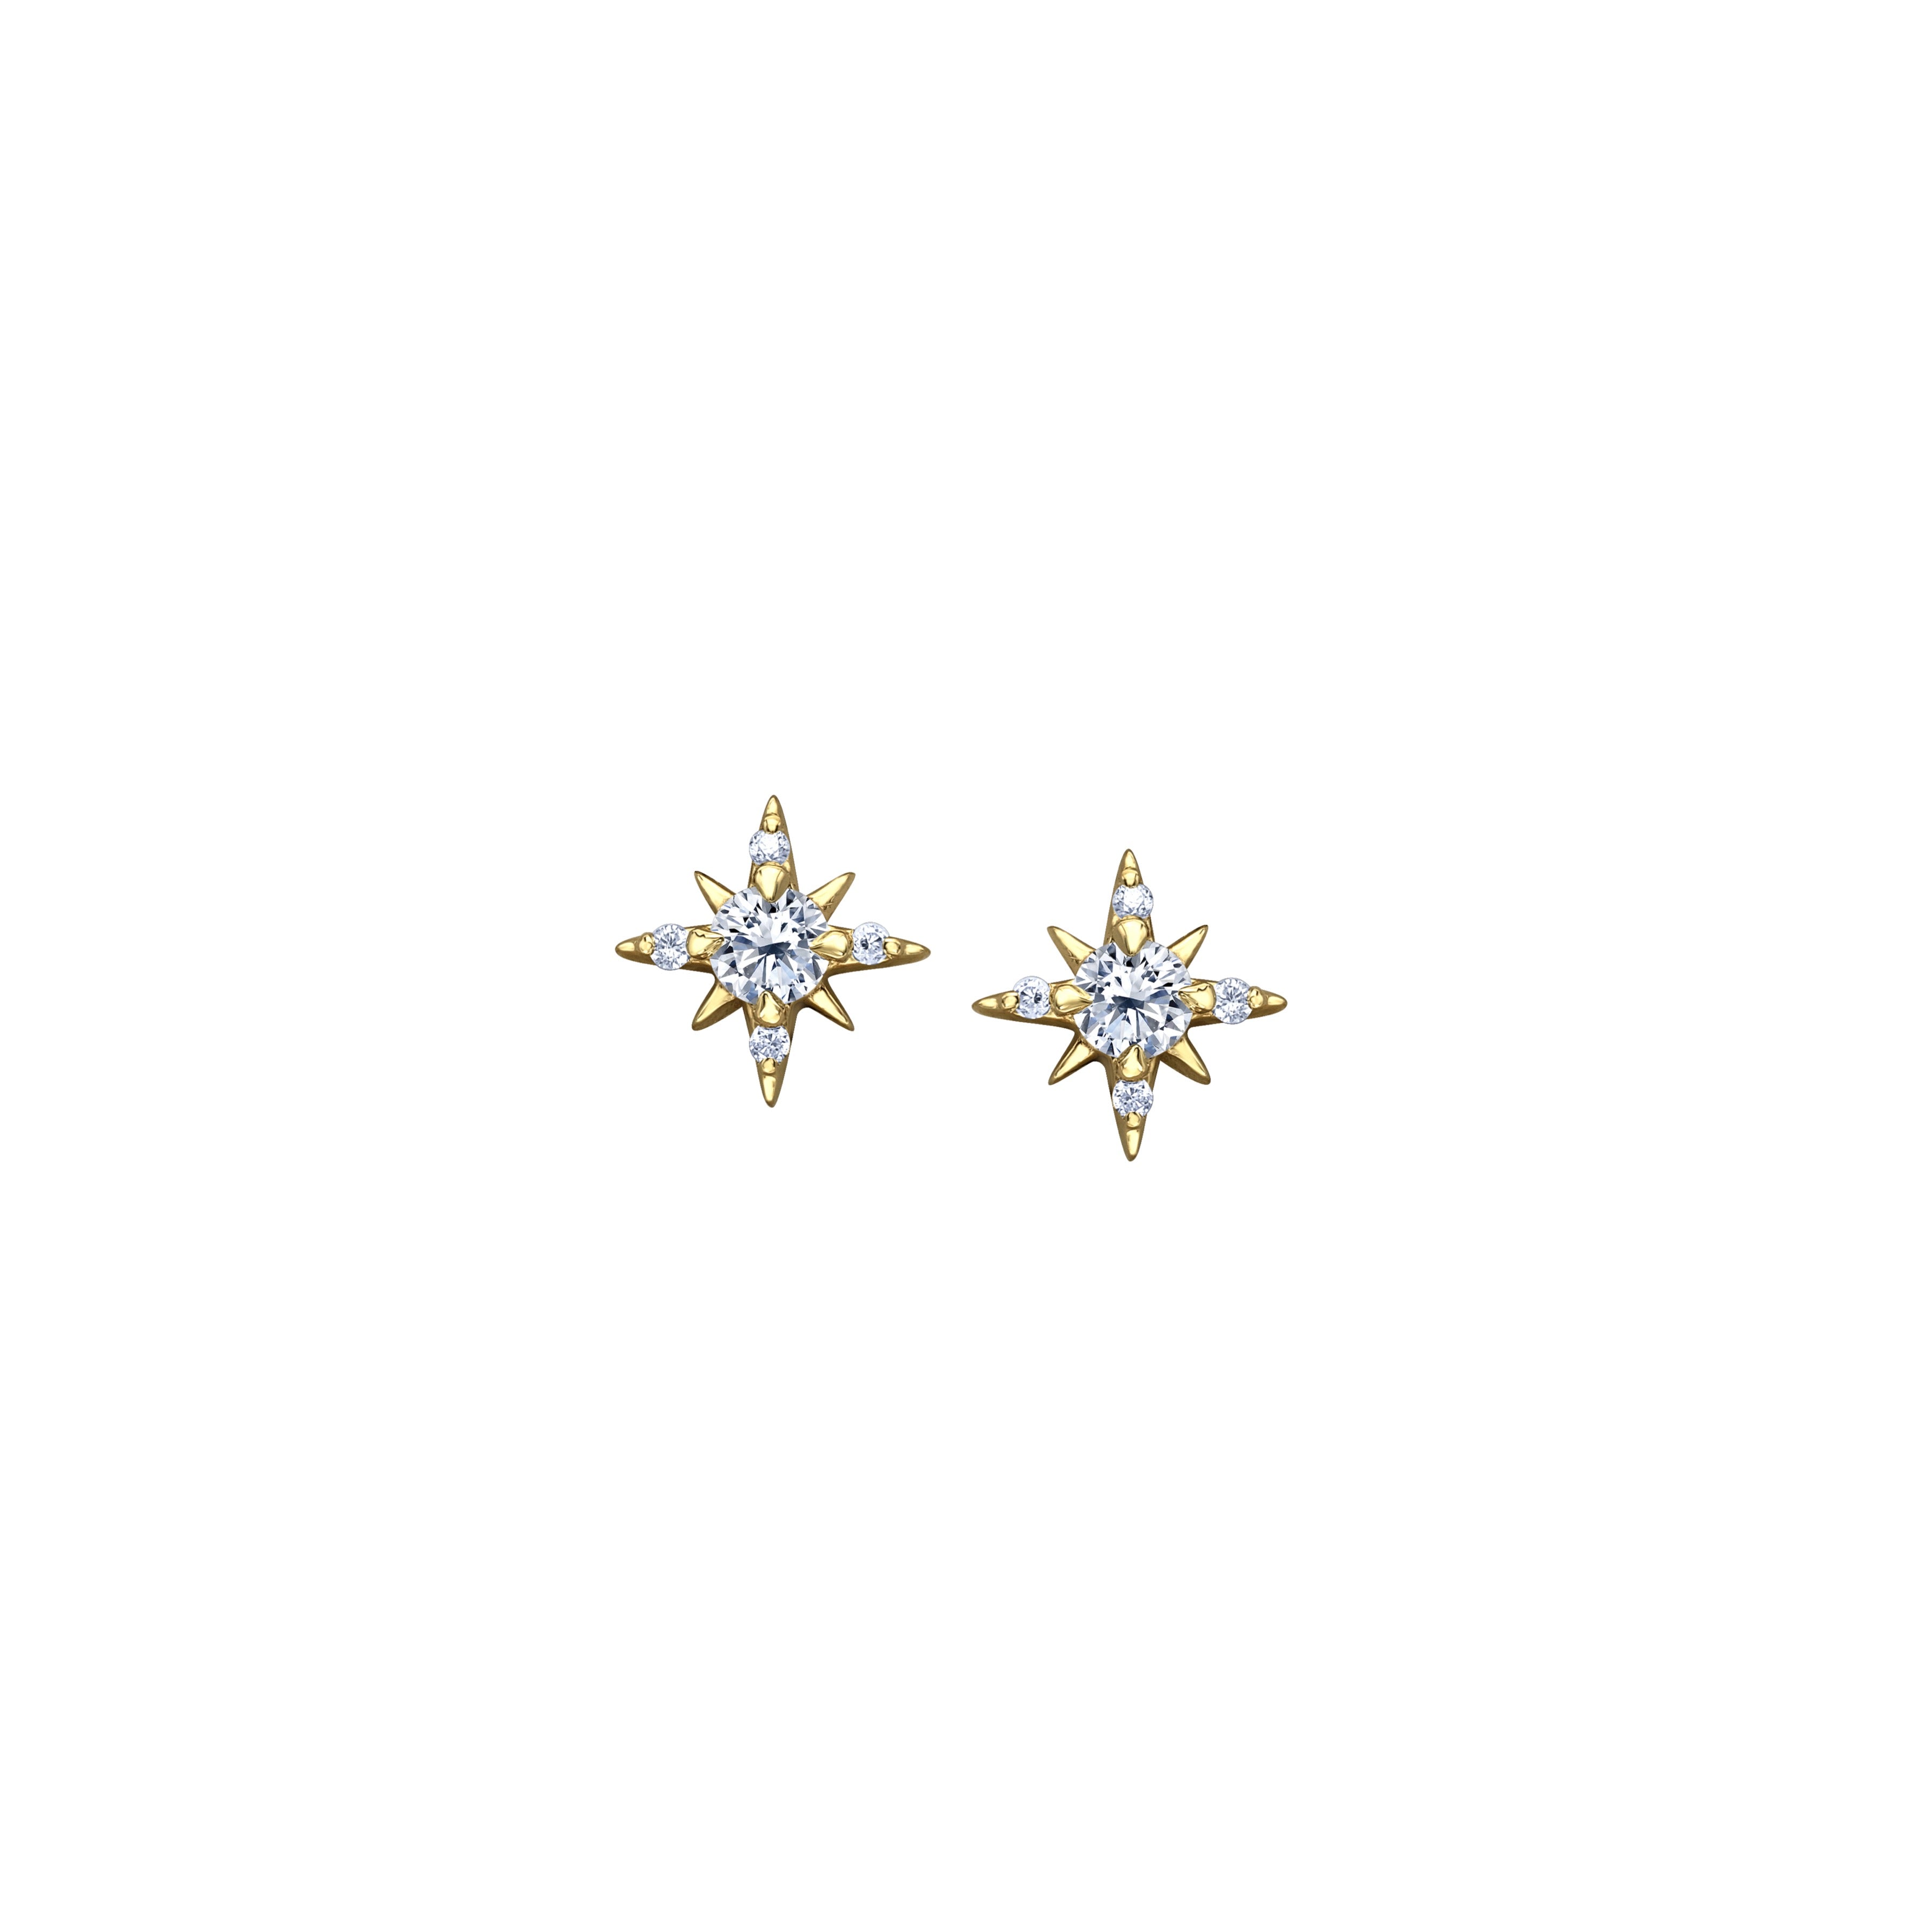 Crafted in 14KT yellow Certified Canadian Gold, these earrings feature the north star set with round brilliant-cut Canadian diamonds.